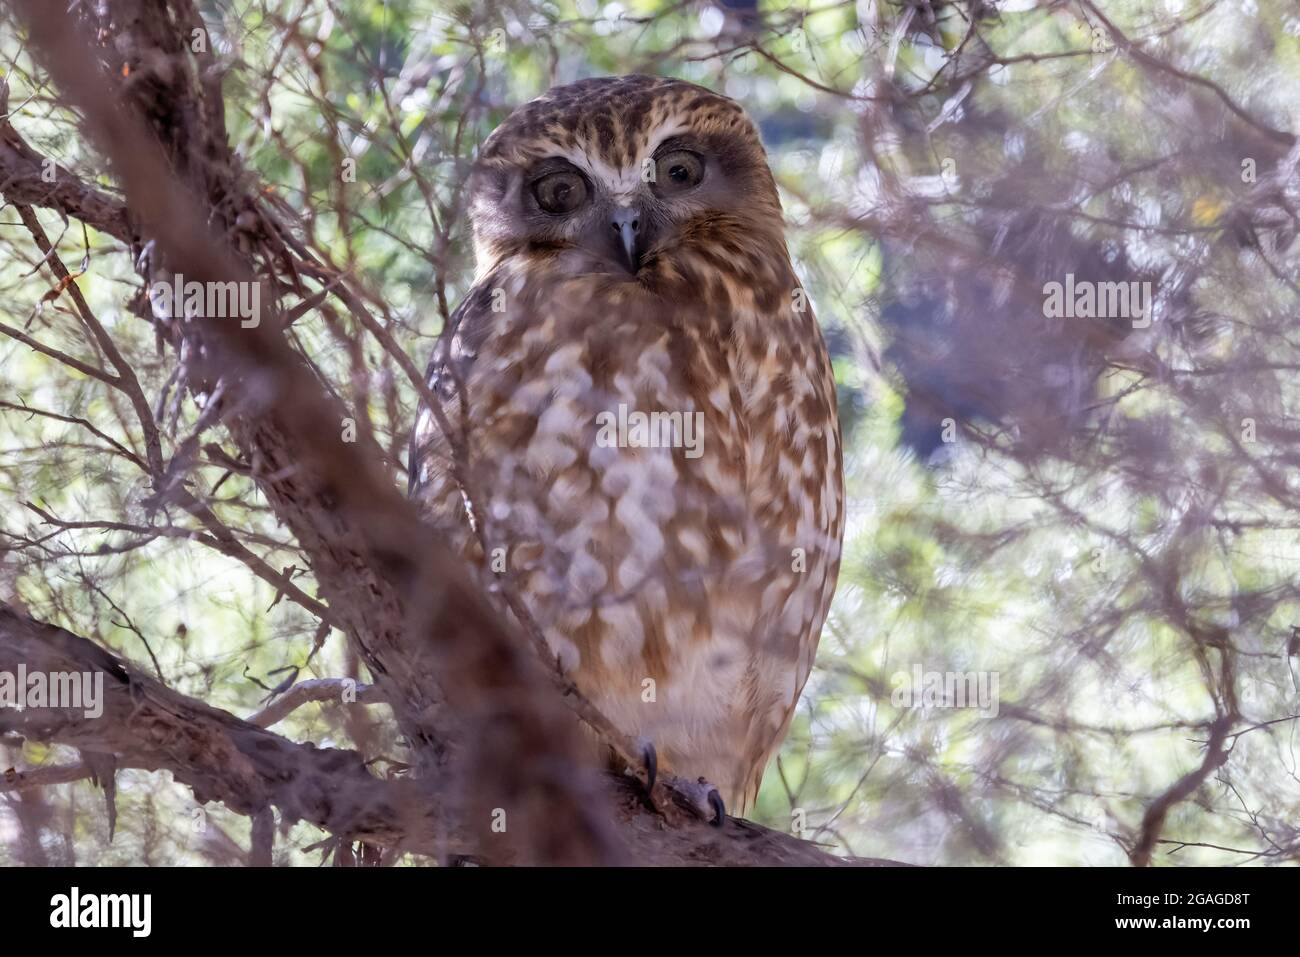 Southern Boobook Owl roosting by day in a bush Stock Photo